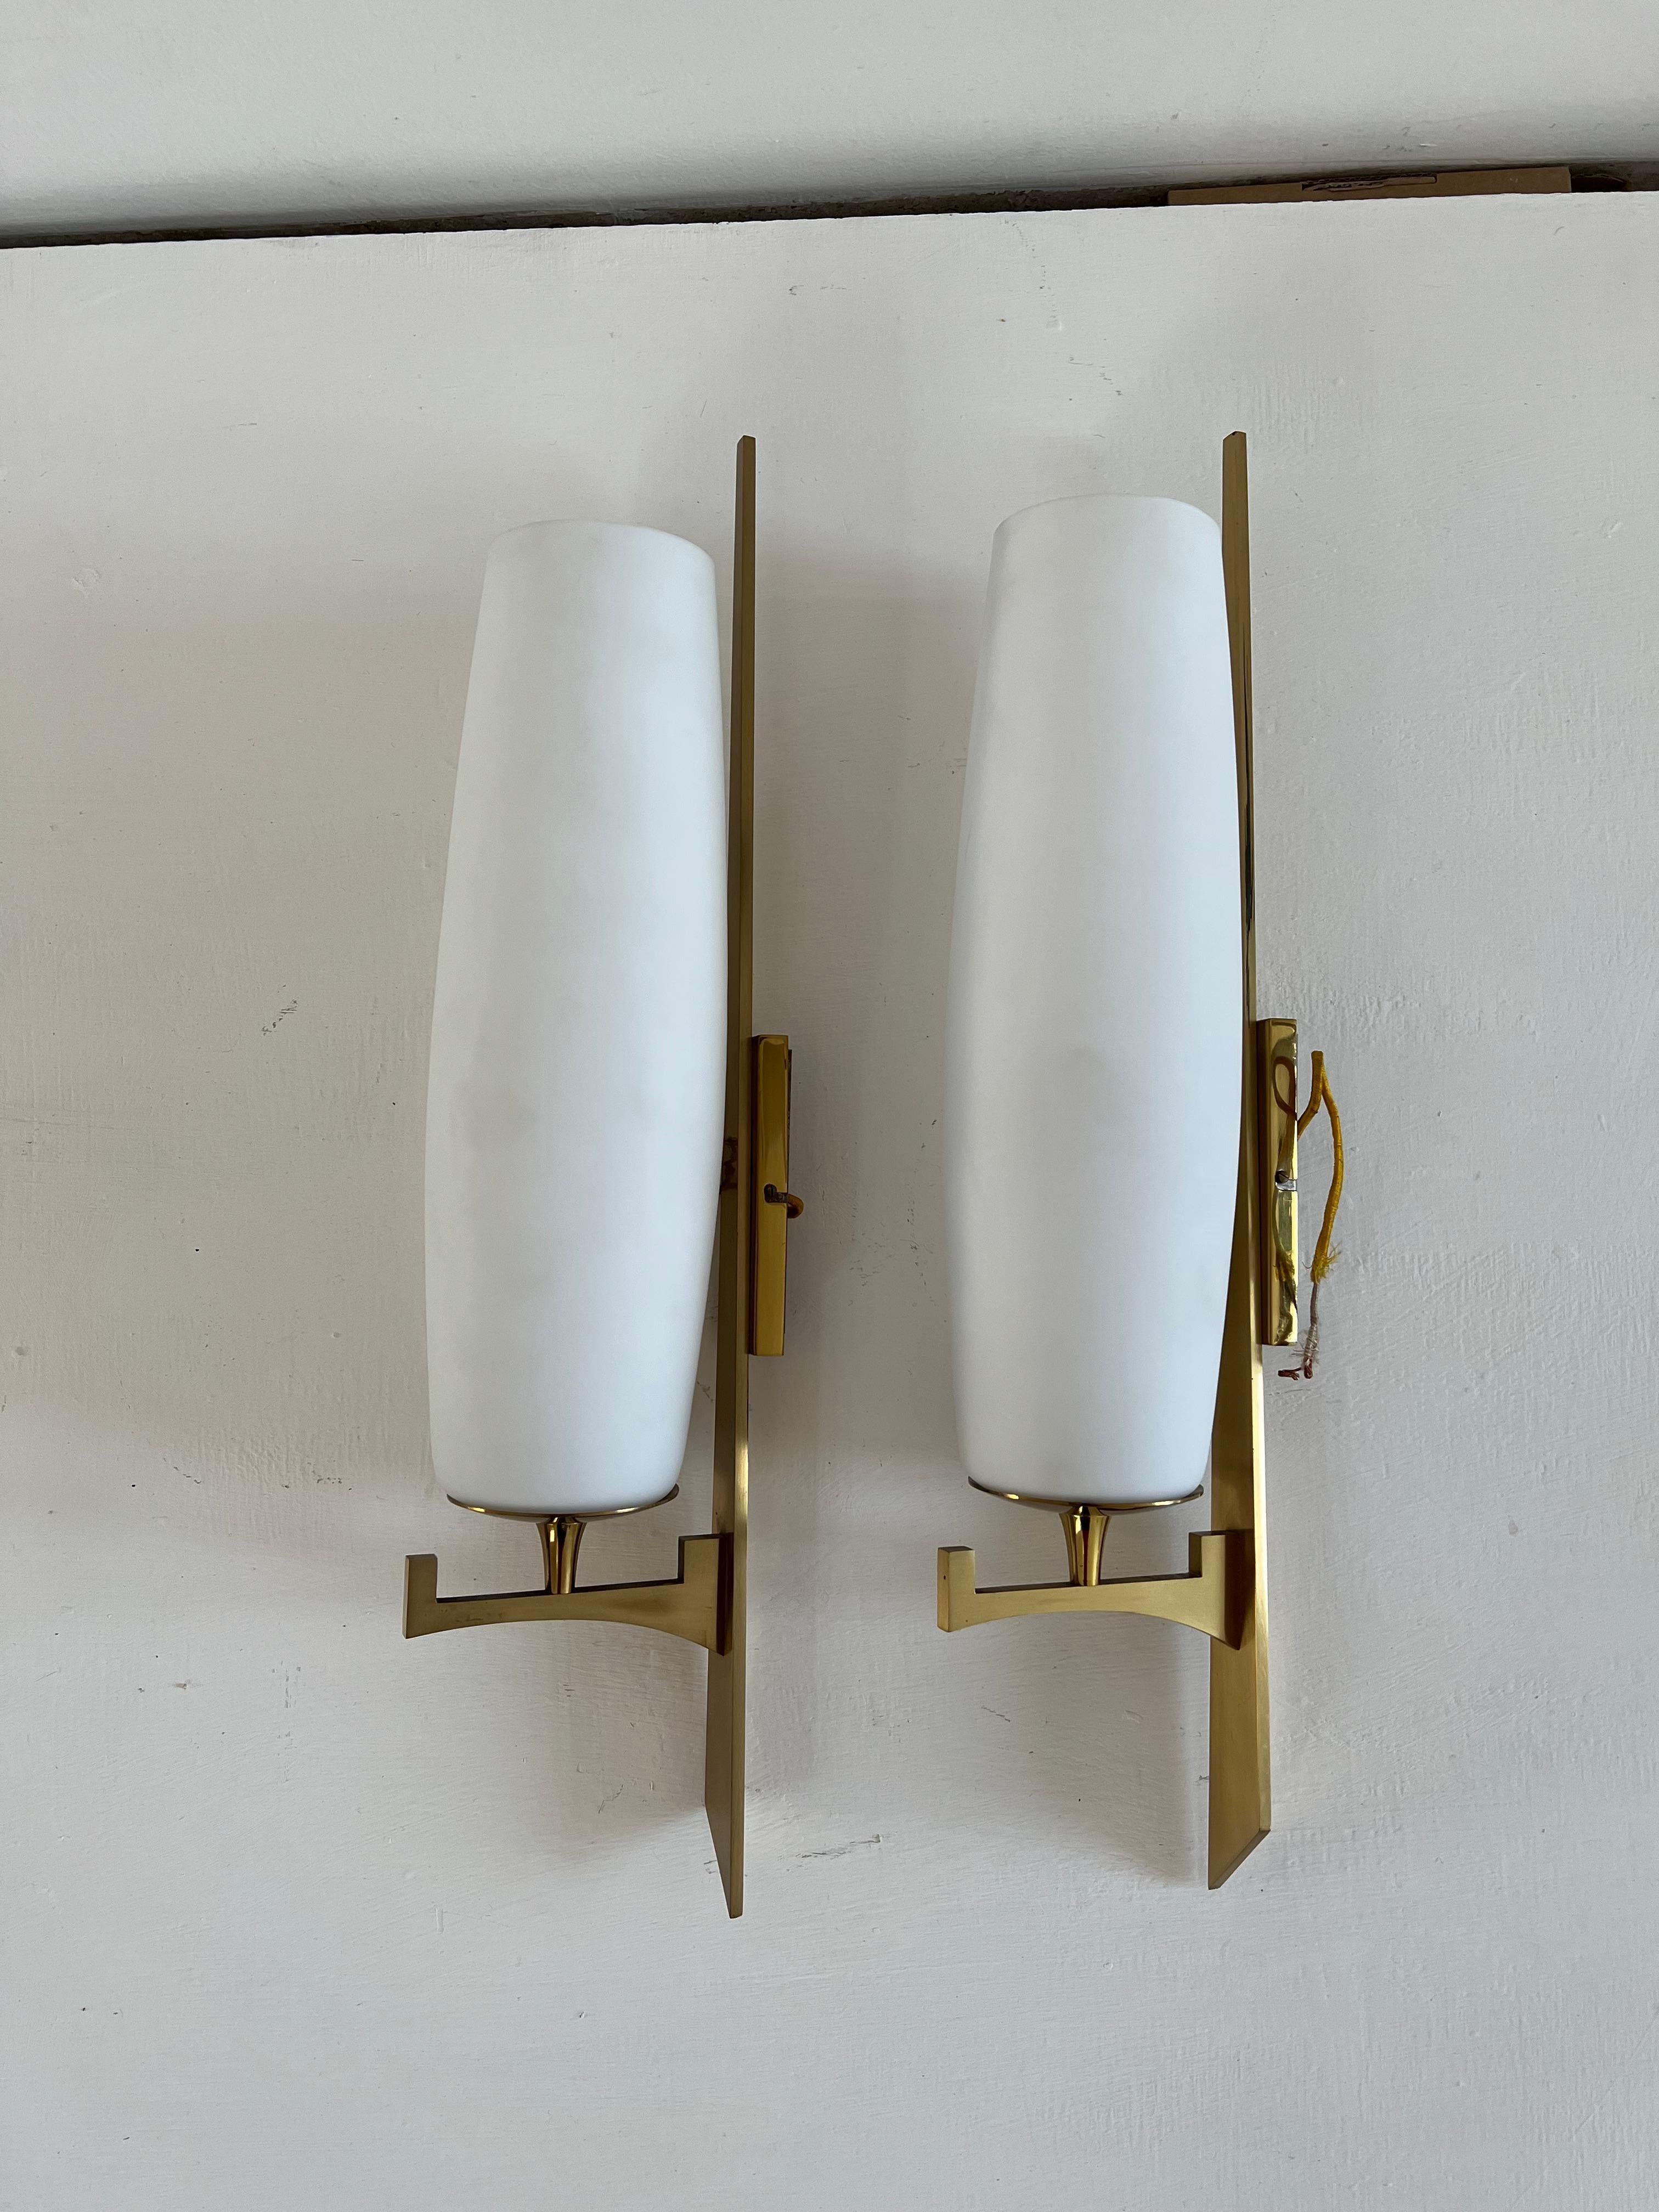 Pair of Mid-Century Modern sconces or wall lights attributed to Maison Arlus in brass and opaline glass.
Made in France, circa 1940s.
The sconces were found in great 